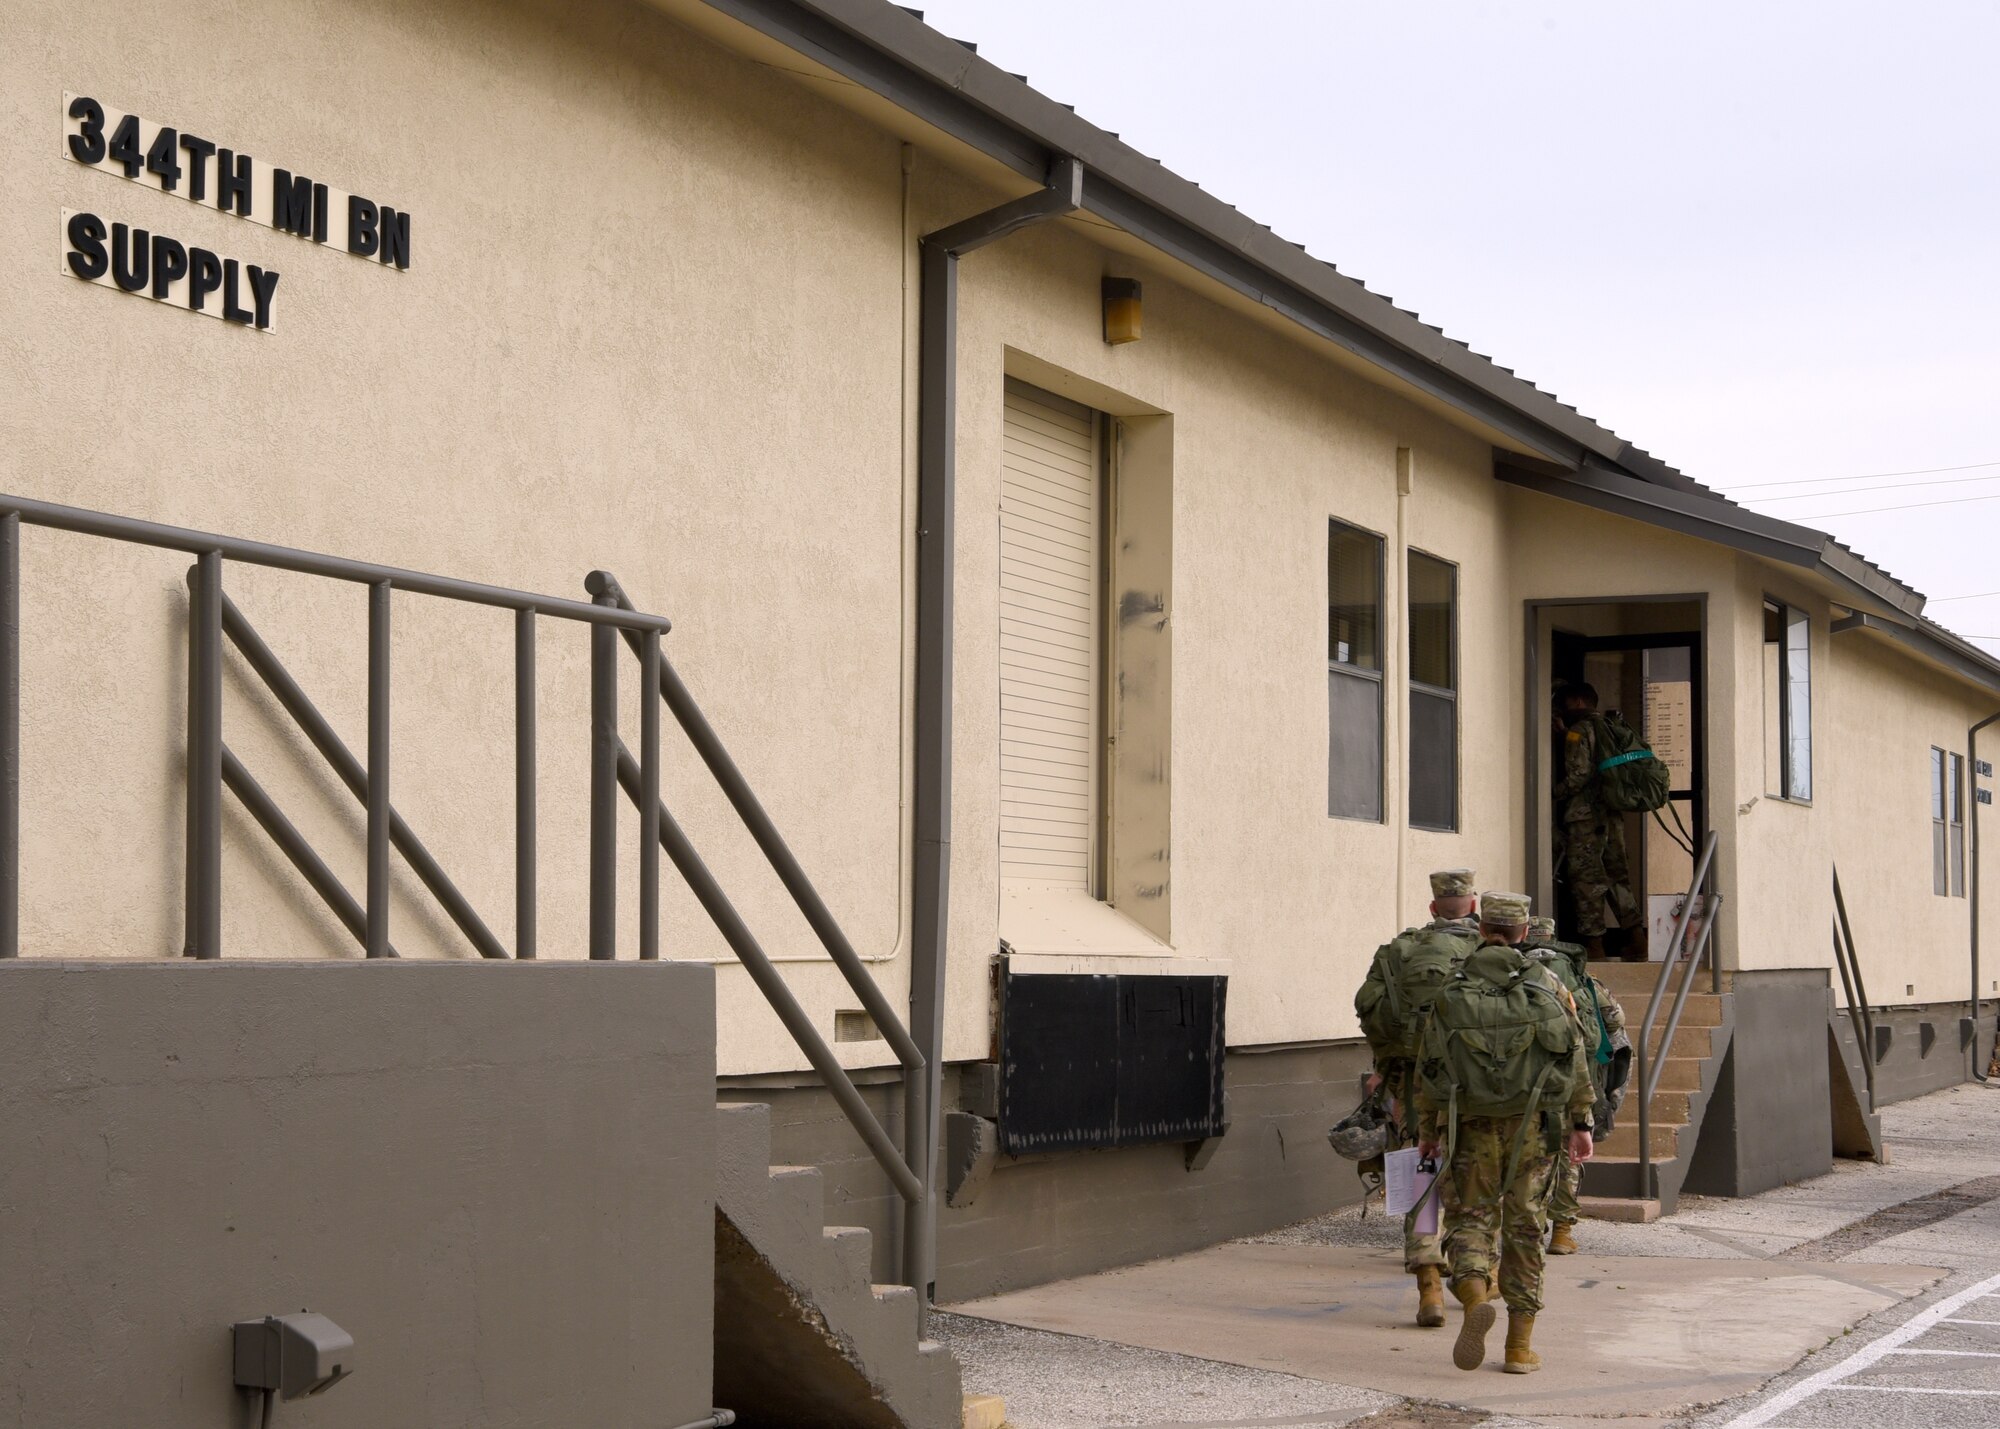 U.S. Army students from the 344th Military Intelligence Battalion wait outside the 344th MI BN Supply building to allow for social distancing inside the building, on Goodfellow Air Force Base, Texas, April 20, 2020. The Soldiers practiced COVID-19 preventative measures through social distancing and wearing masks, while maintaining mission essential operations. (U.S. Air Force photo by Airman 1st Class Abbey Rieves)